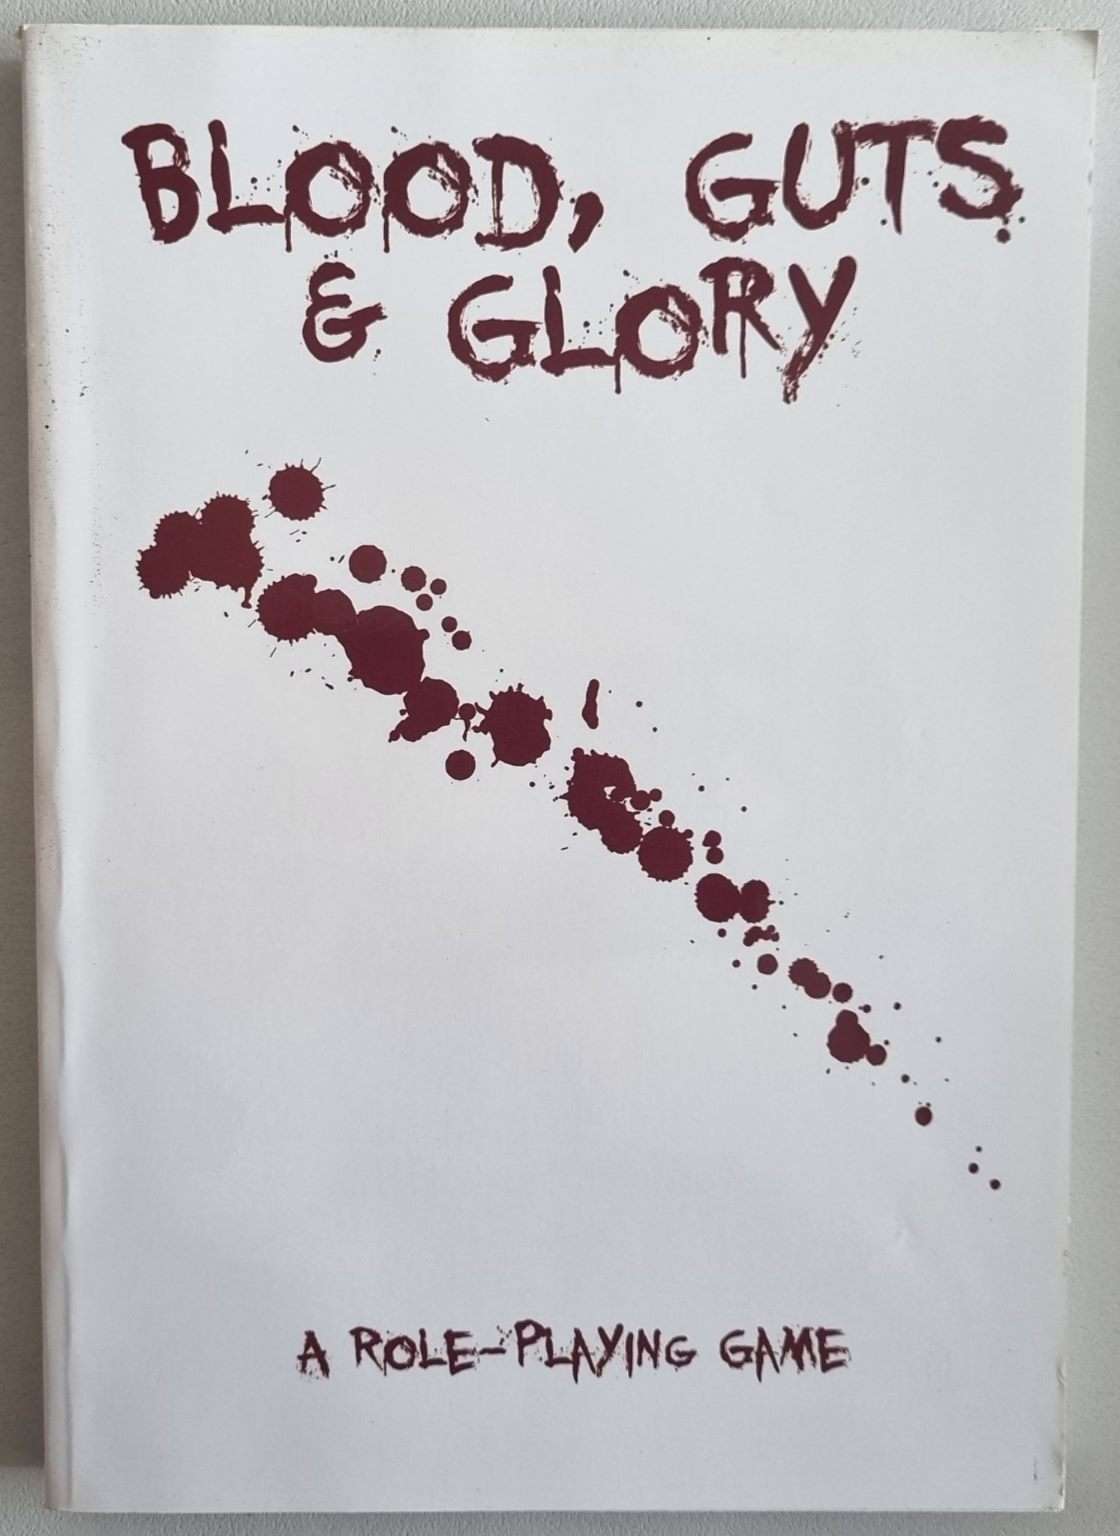 Blood, Guts & Glory: A Roleplaying Game